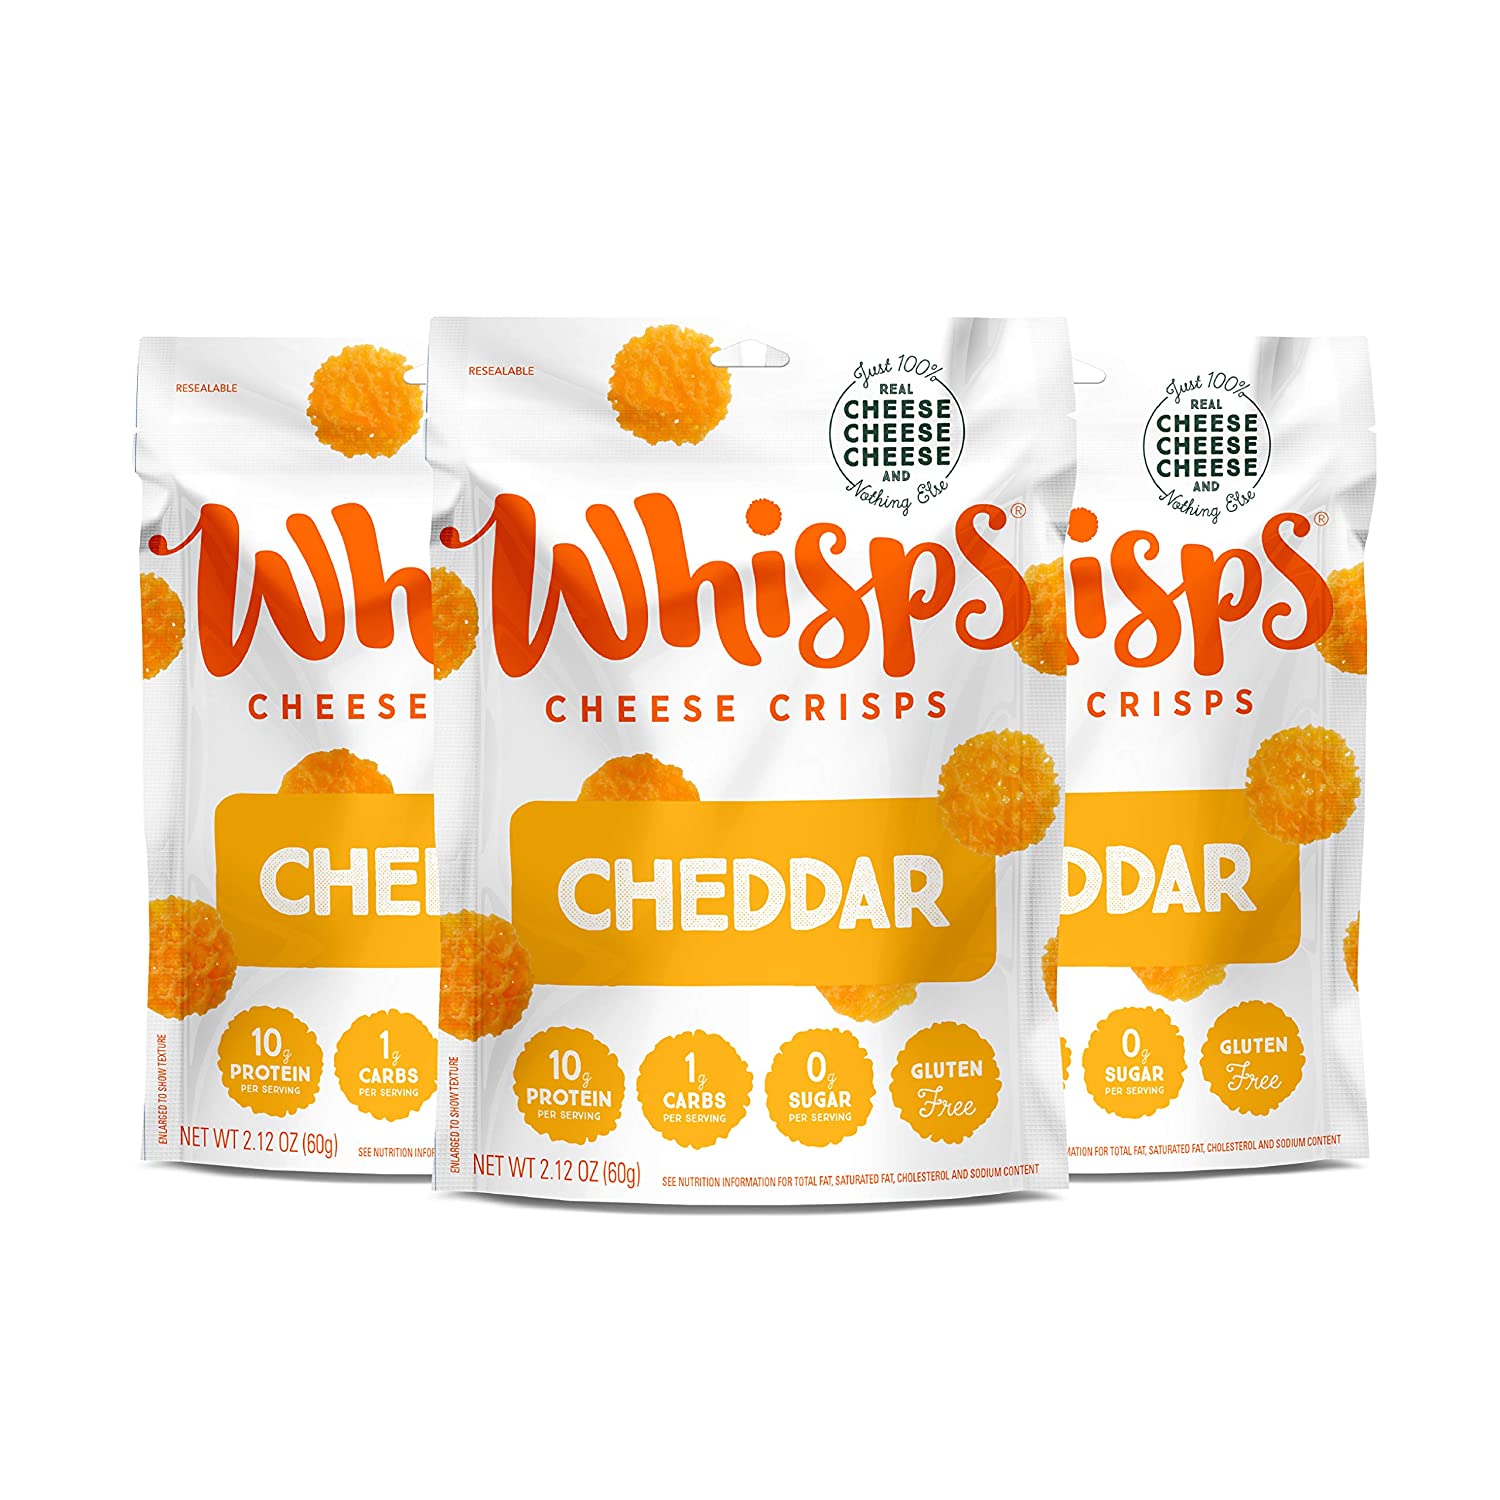 Cello Whisps Cheese Crisps - Cheddar (2.12oz) - High-quality Cheese Snacks by Cello Whisps at 